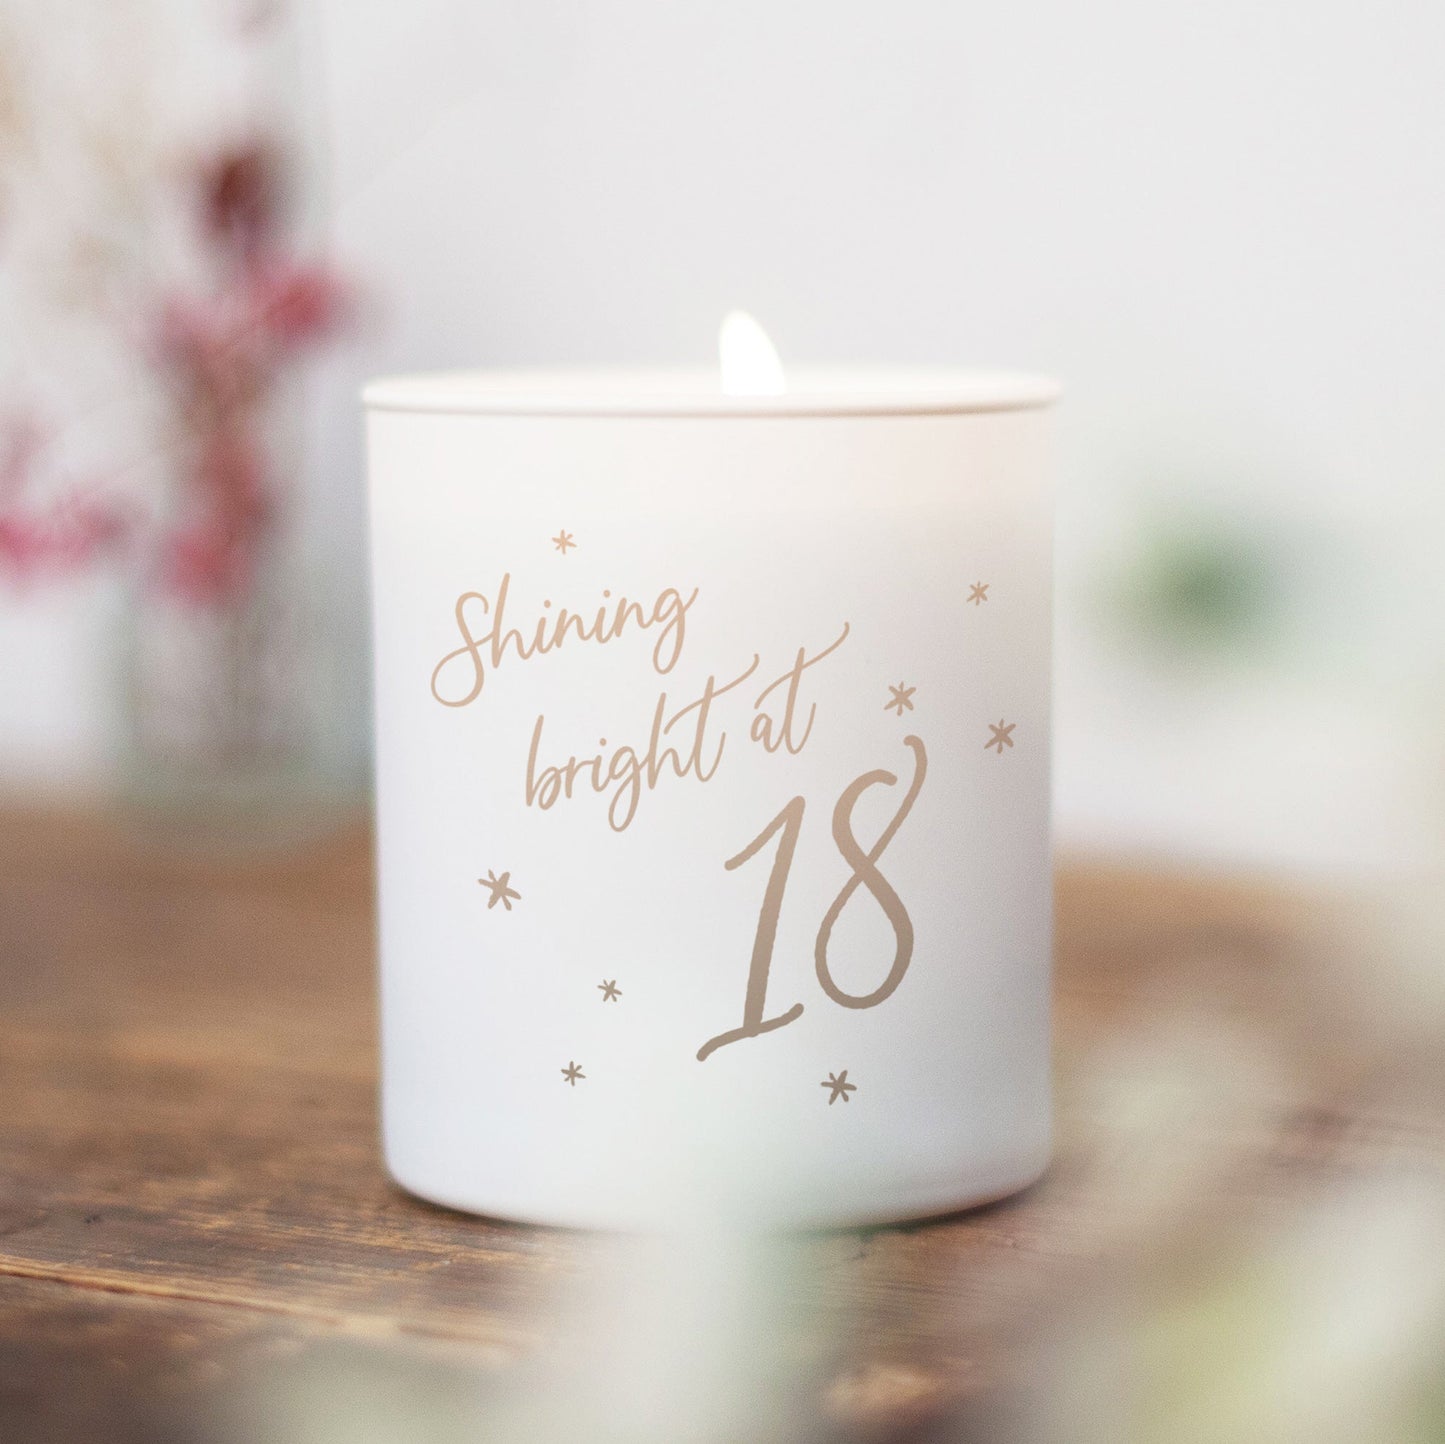 18th Birthday Gift Shining Bright Candle - Kindred Fires